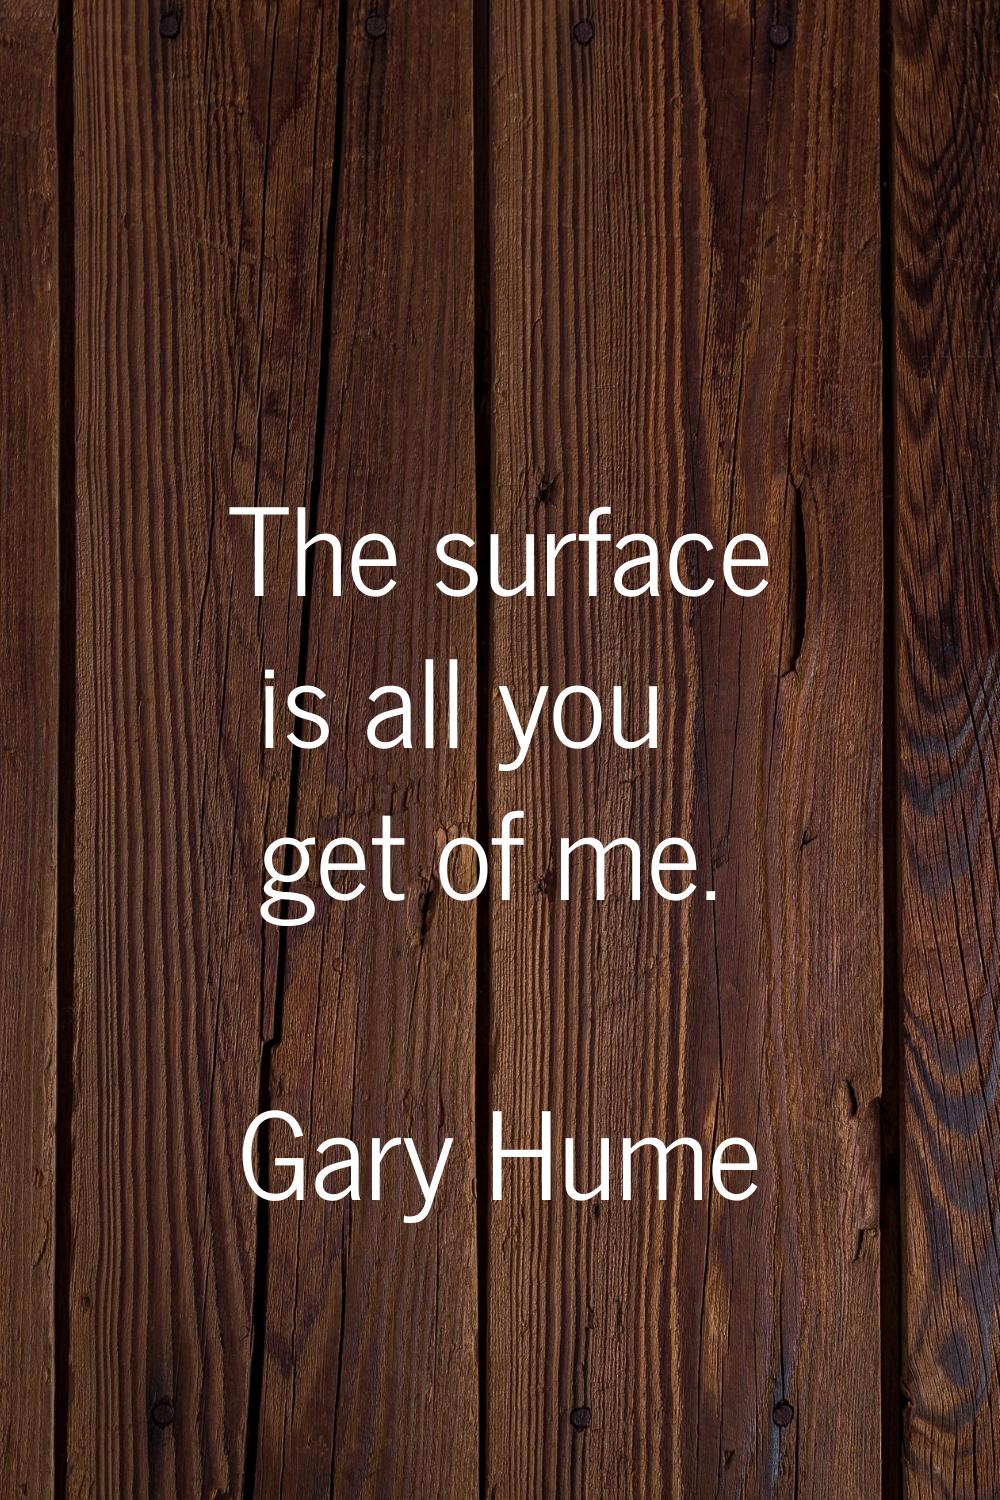 The surface is all you get of me.